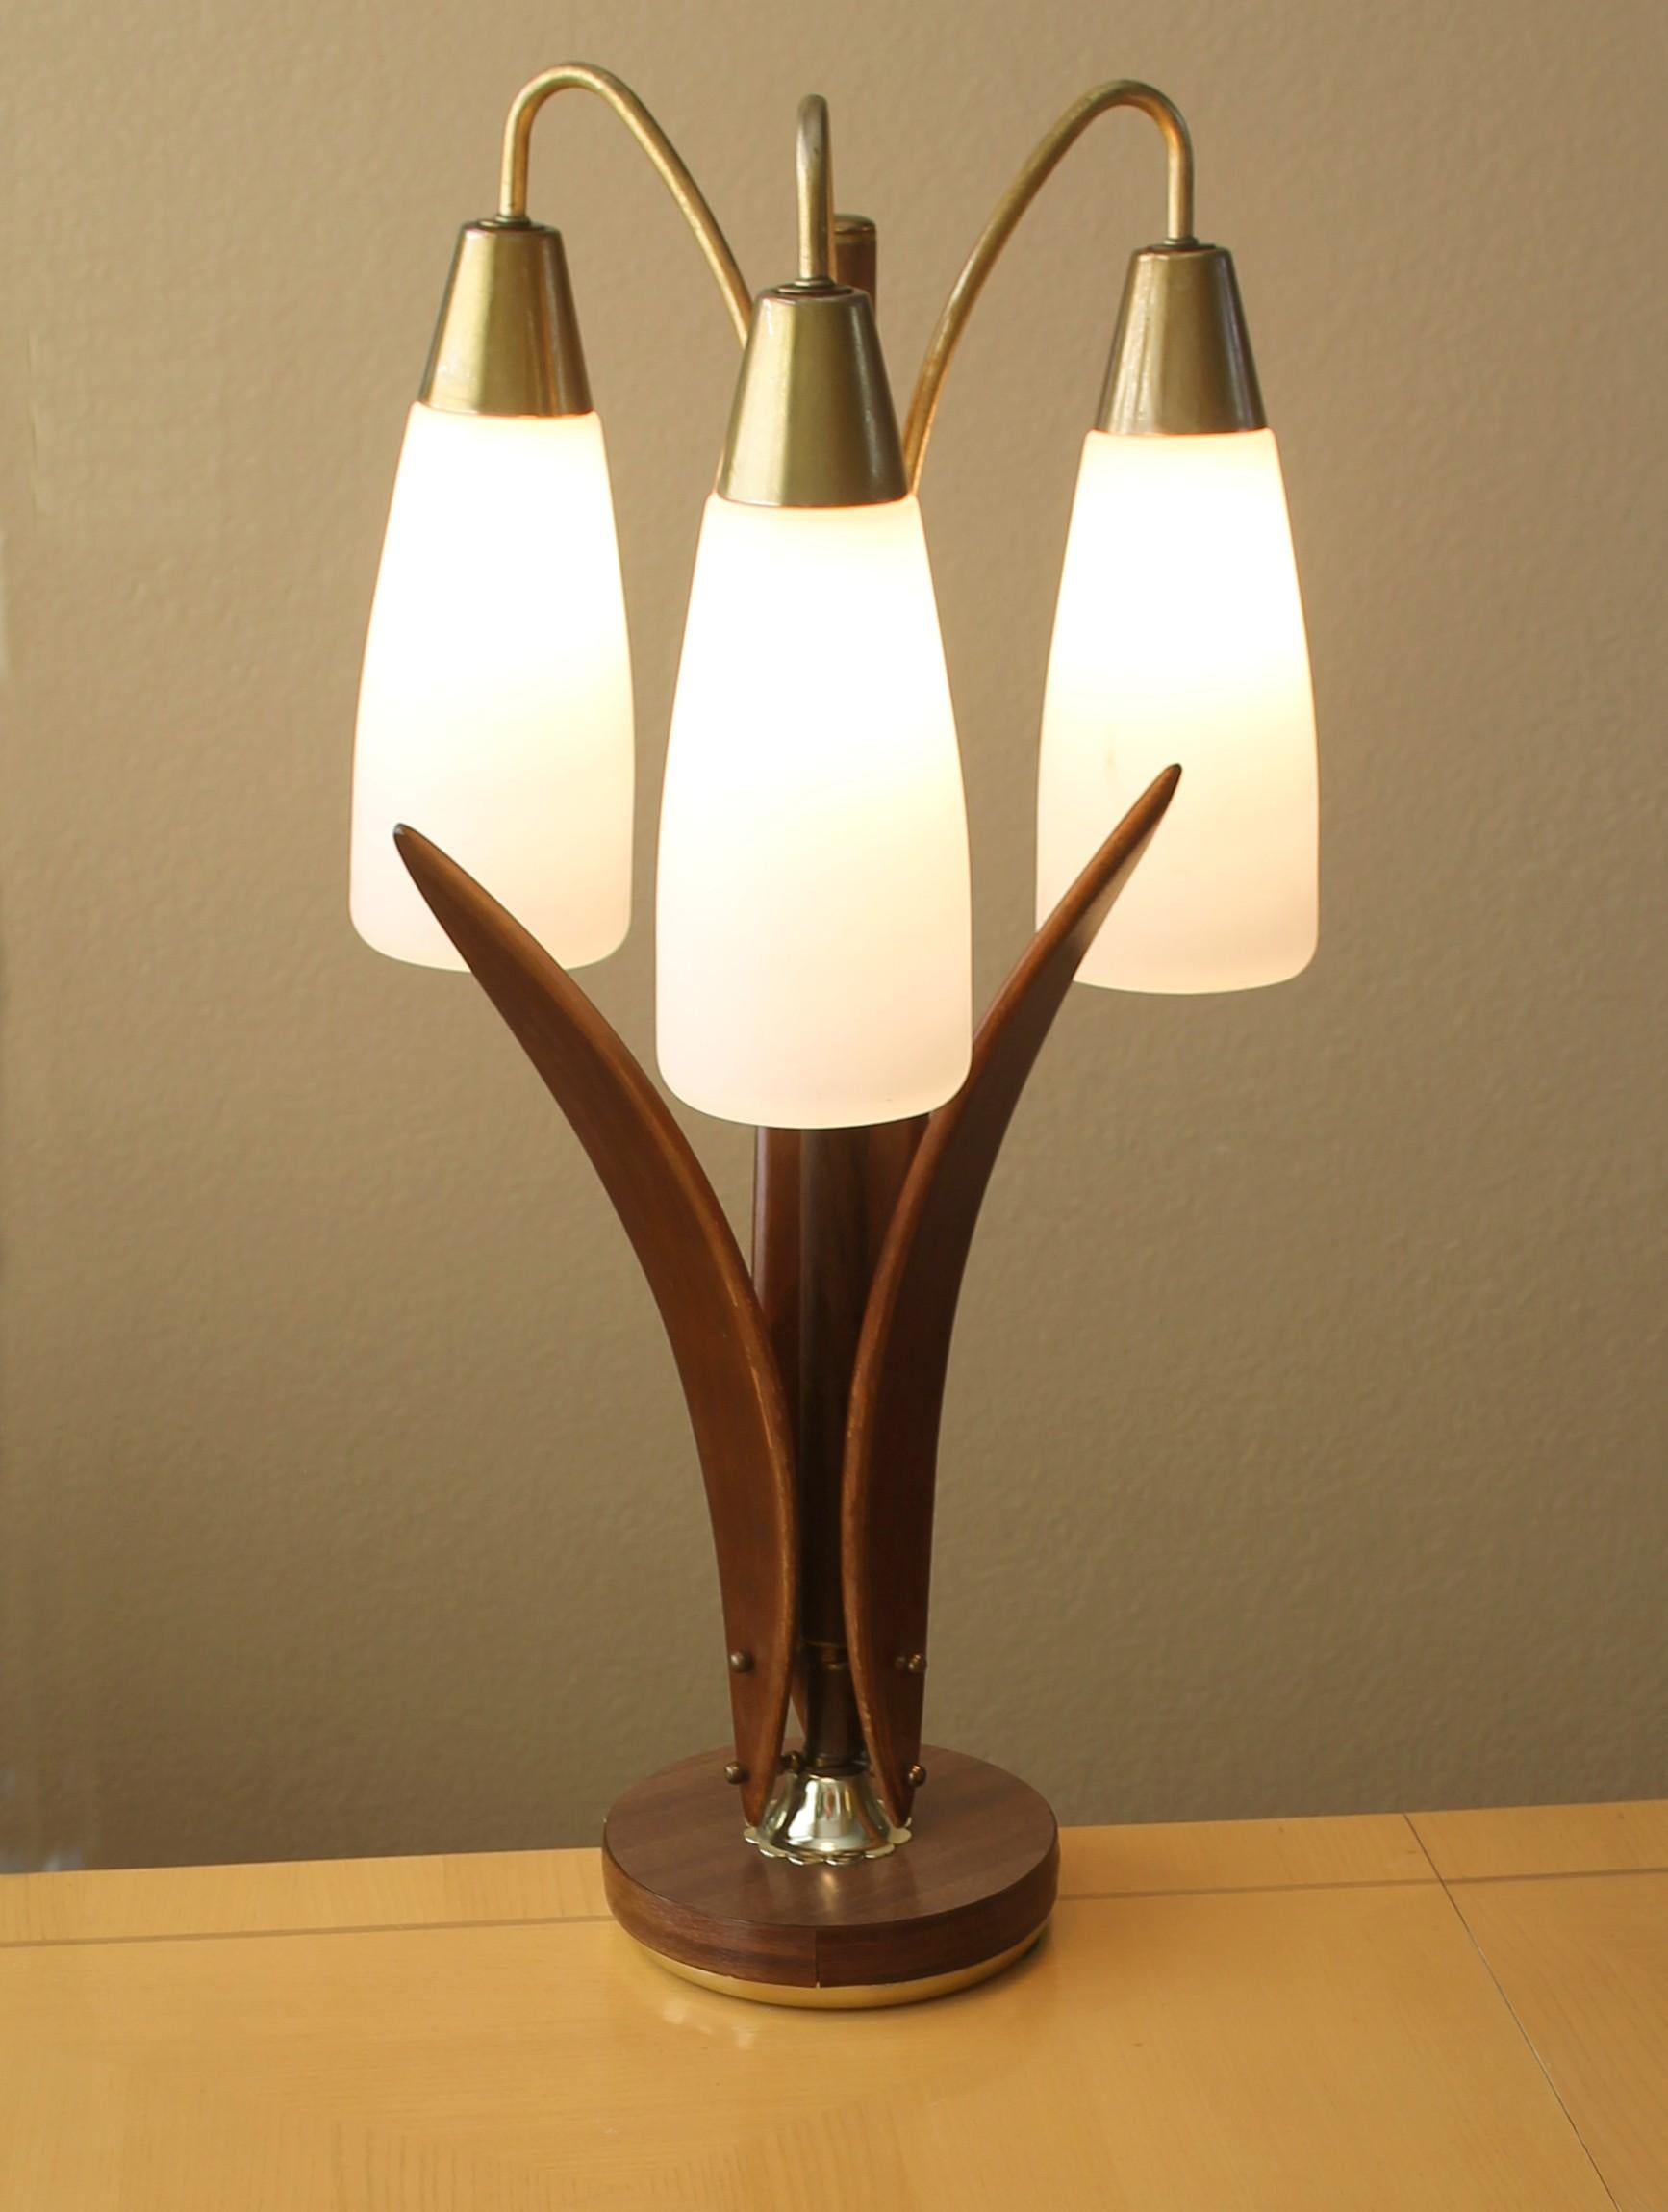 Exquisite Danish Modern 3 Shade Glass and Walnut Lamp 1950s Mid Century Lighting For Sale 1